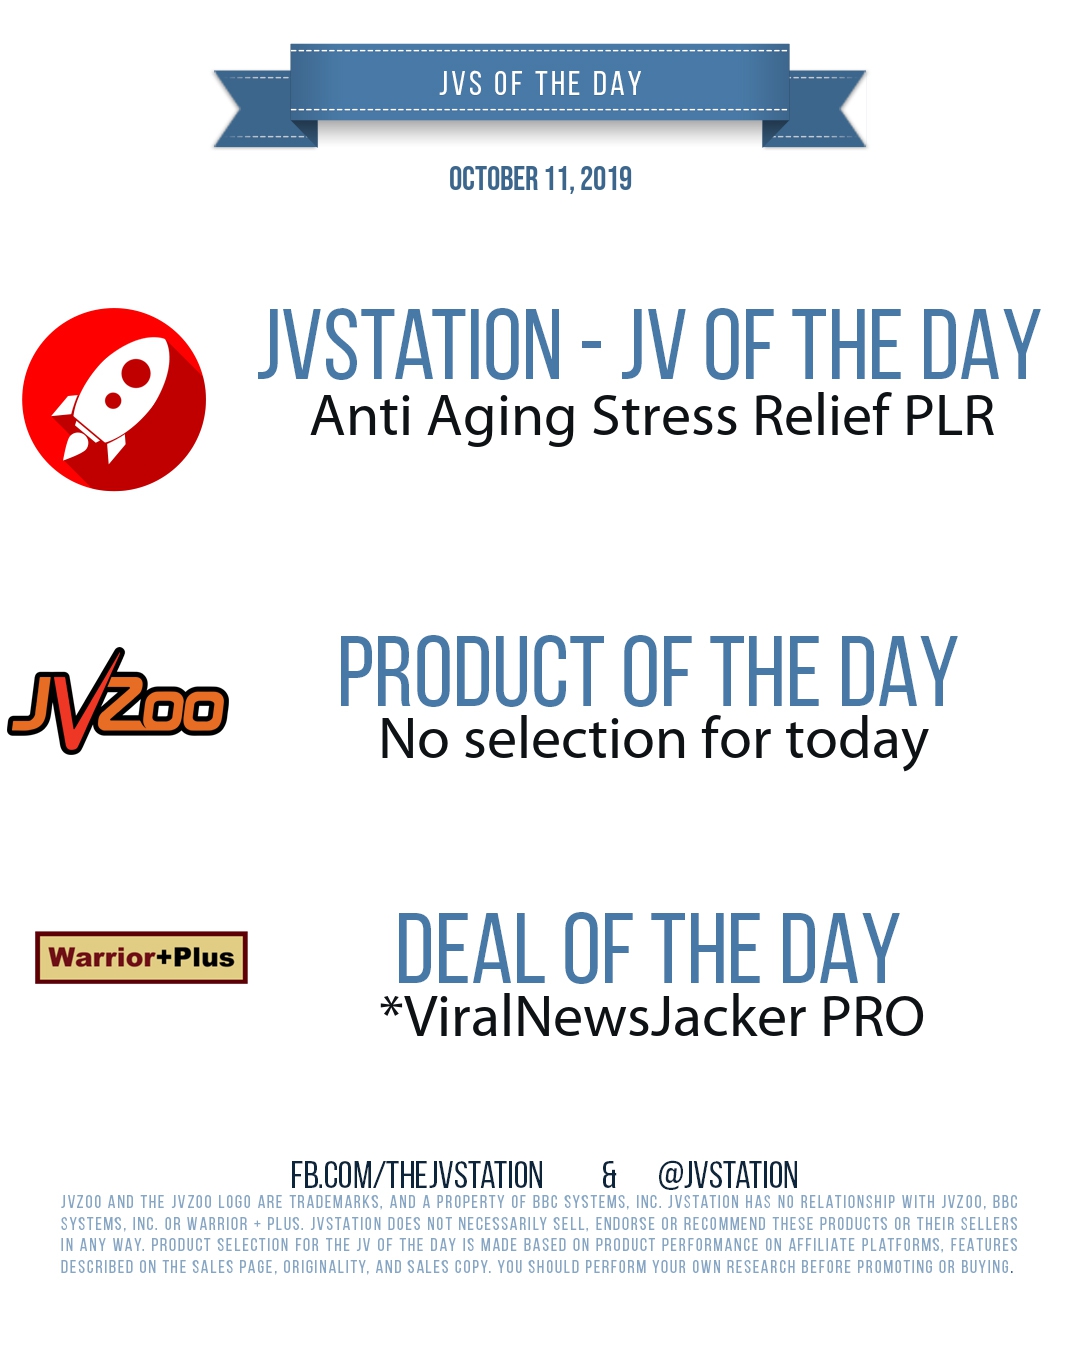 JVs of the day - October 11, 2019